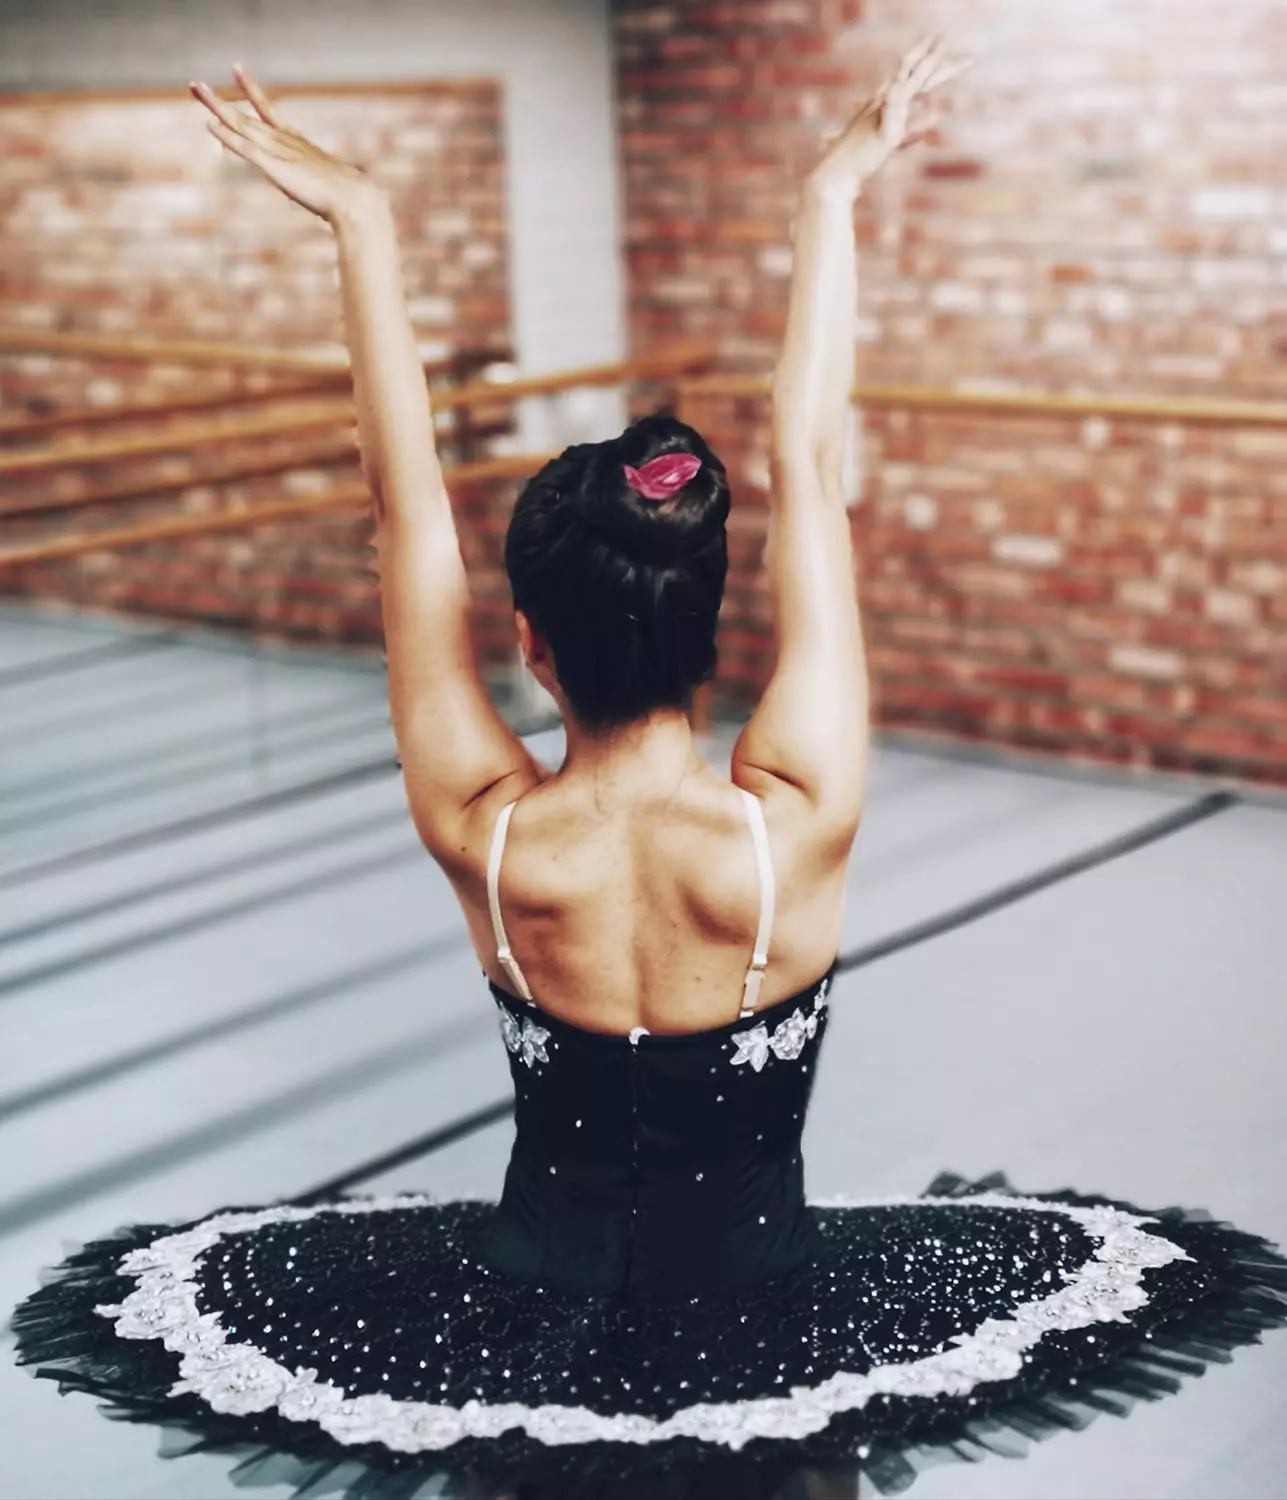 Now's your big chance to become the prima ballerina you always wanted to be (